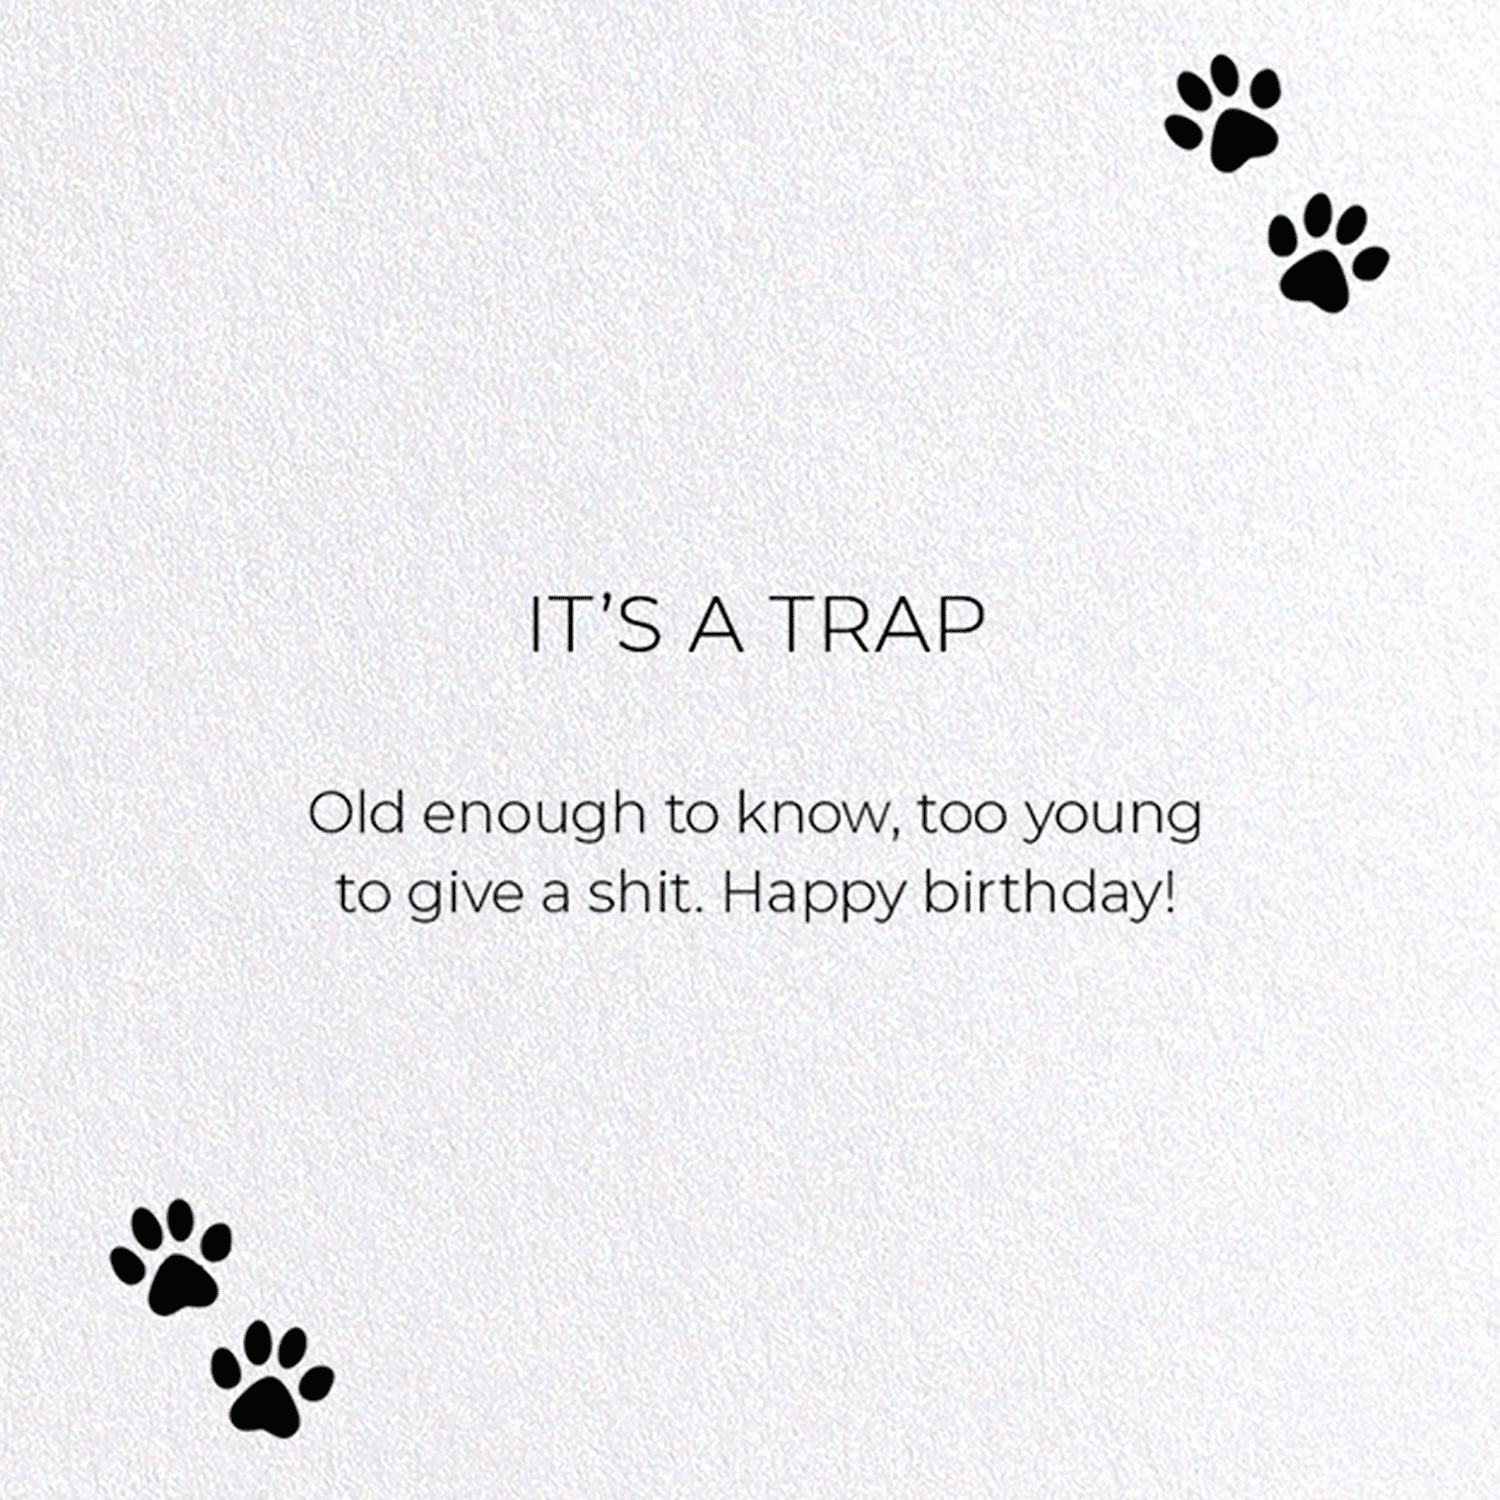 IT'S A TRAP: Funny Animal Greeting Card